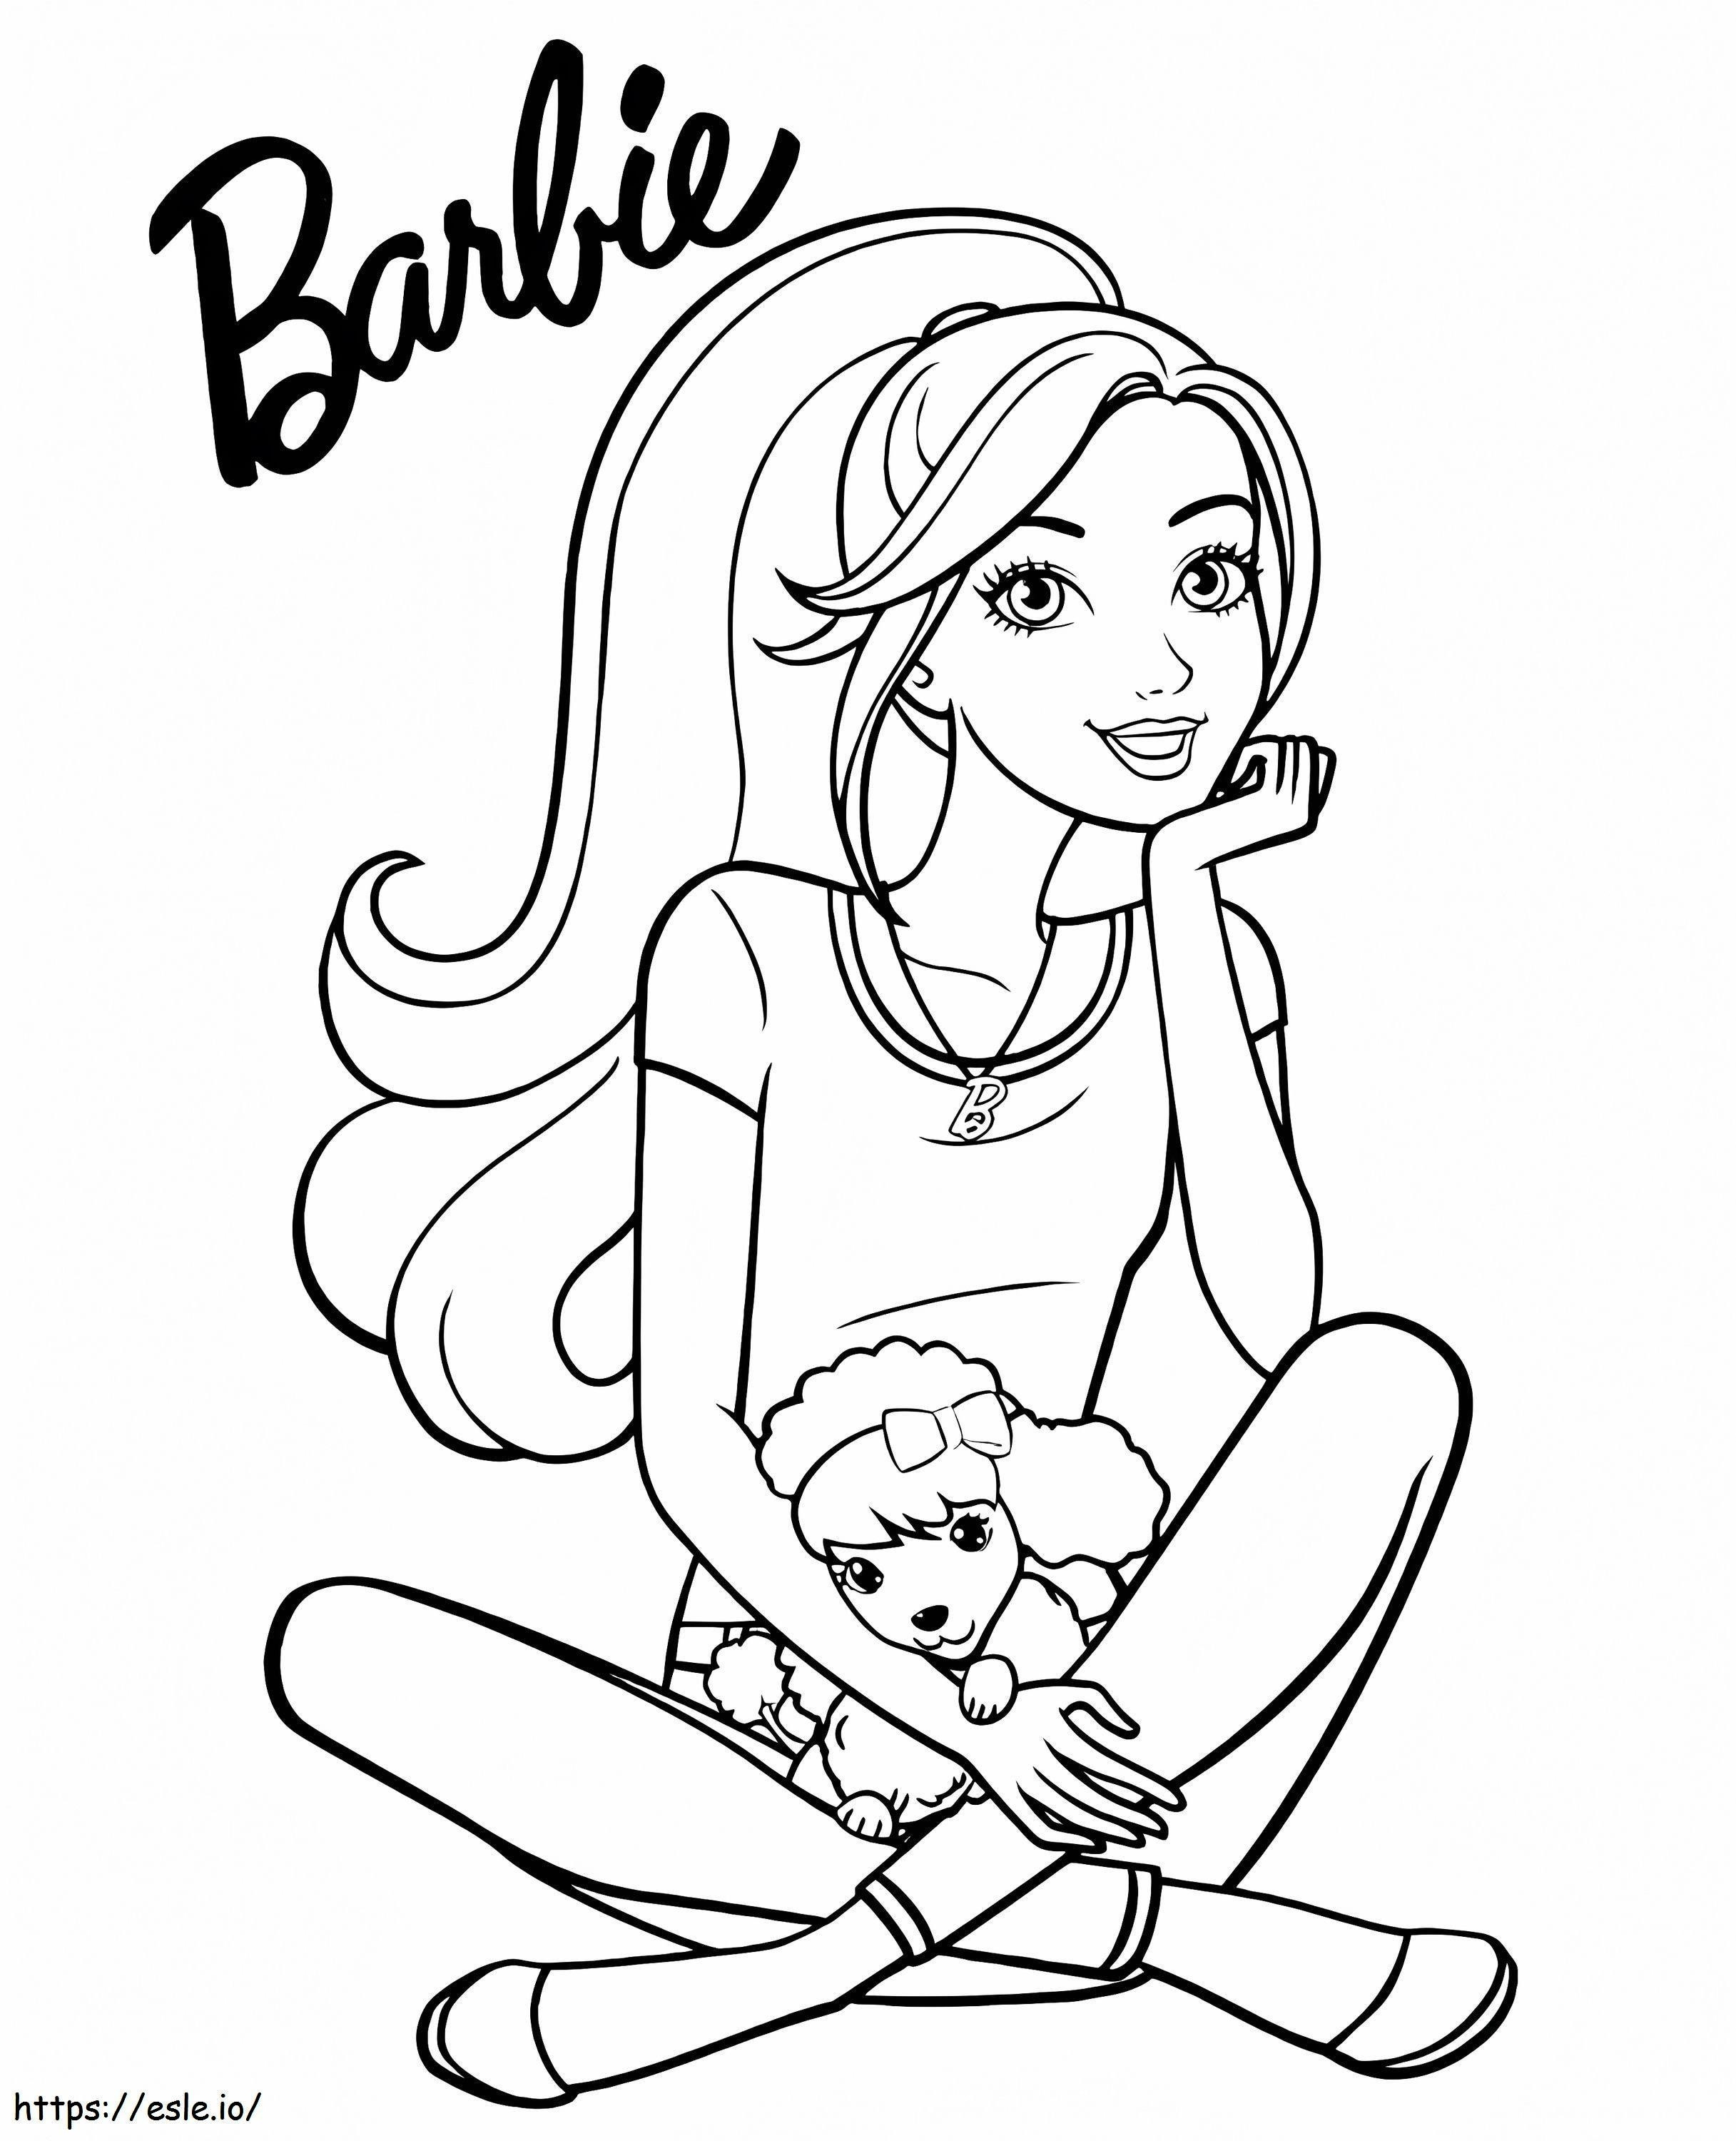 Barbie 4 coloring page